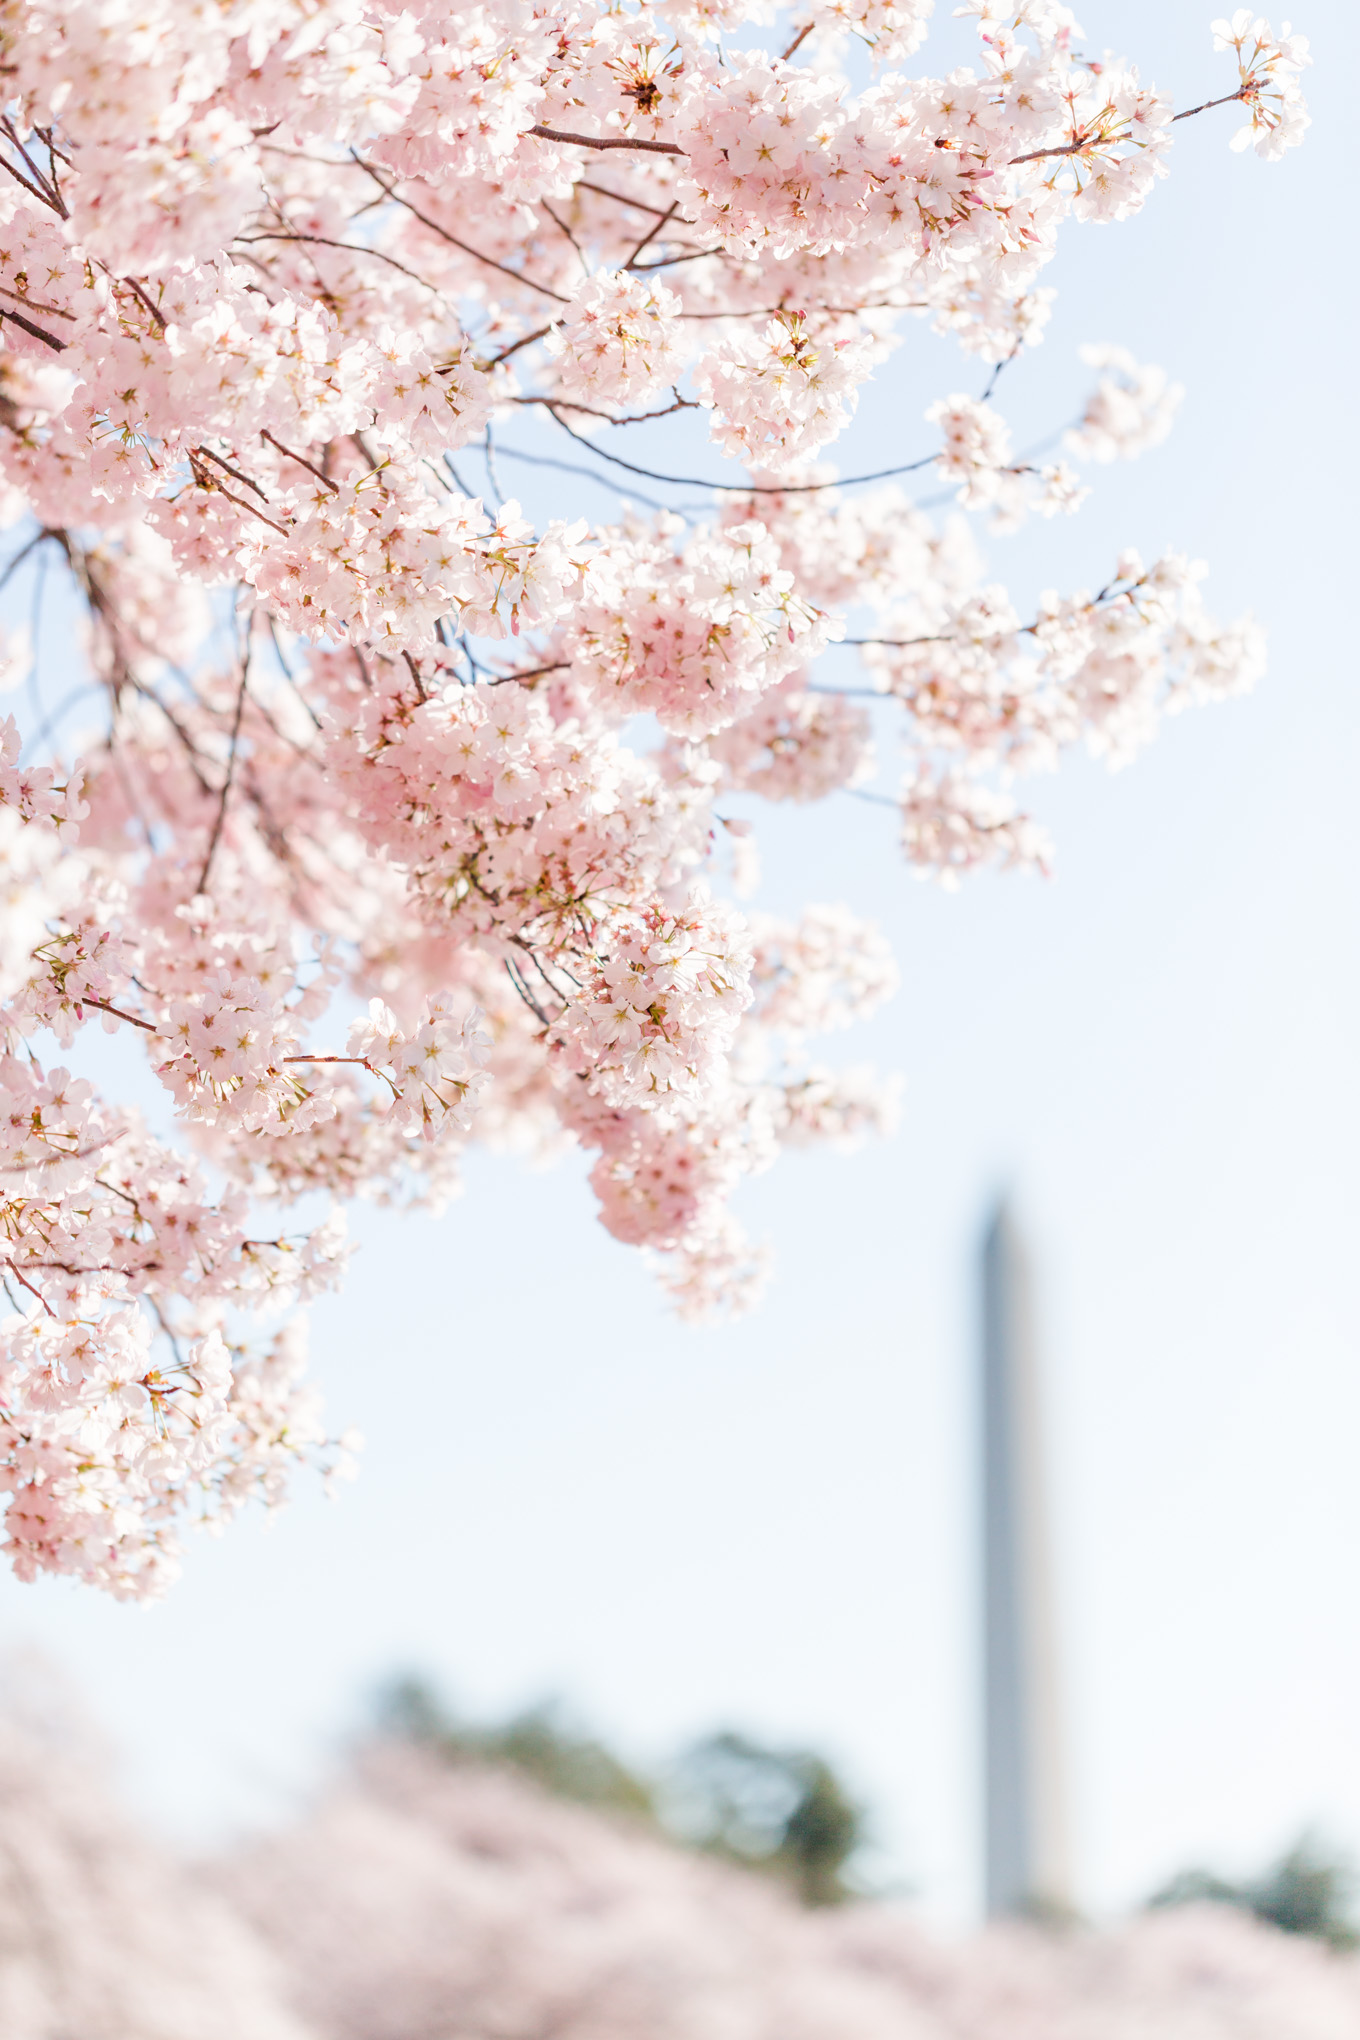 D.C. cherry blossoms, cherry blossoms, pink flowers, pink blooms, spring flowers, cherry blossom season, cherry blossoms photographer, D.C. cherry blossoms photographer, values based business, Washington Monument